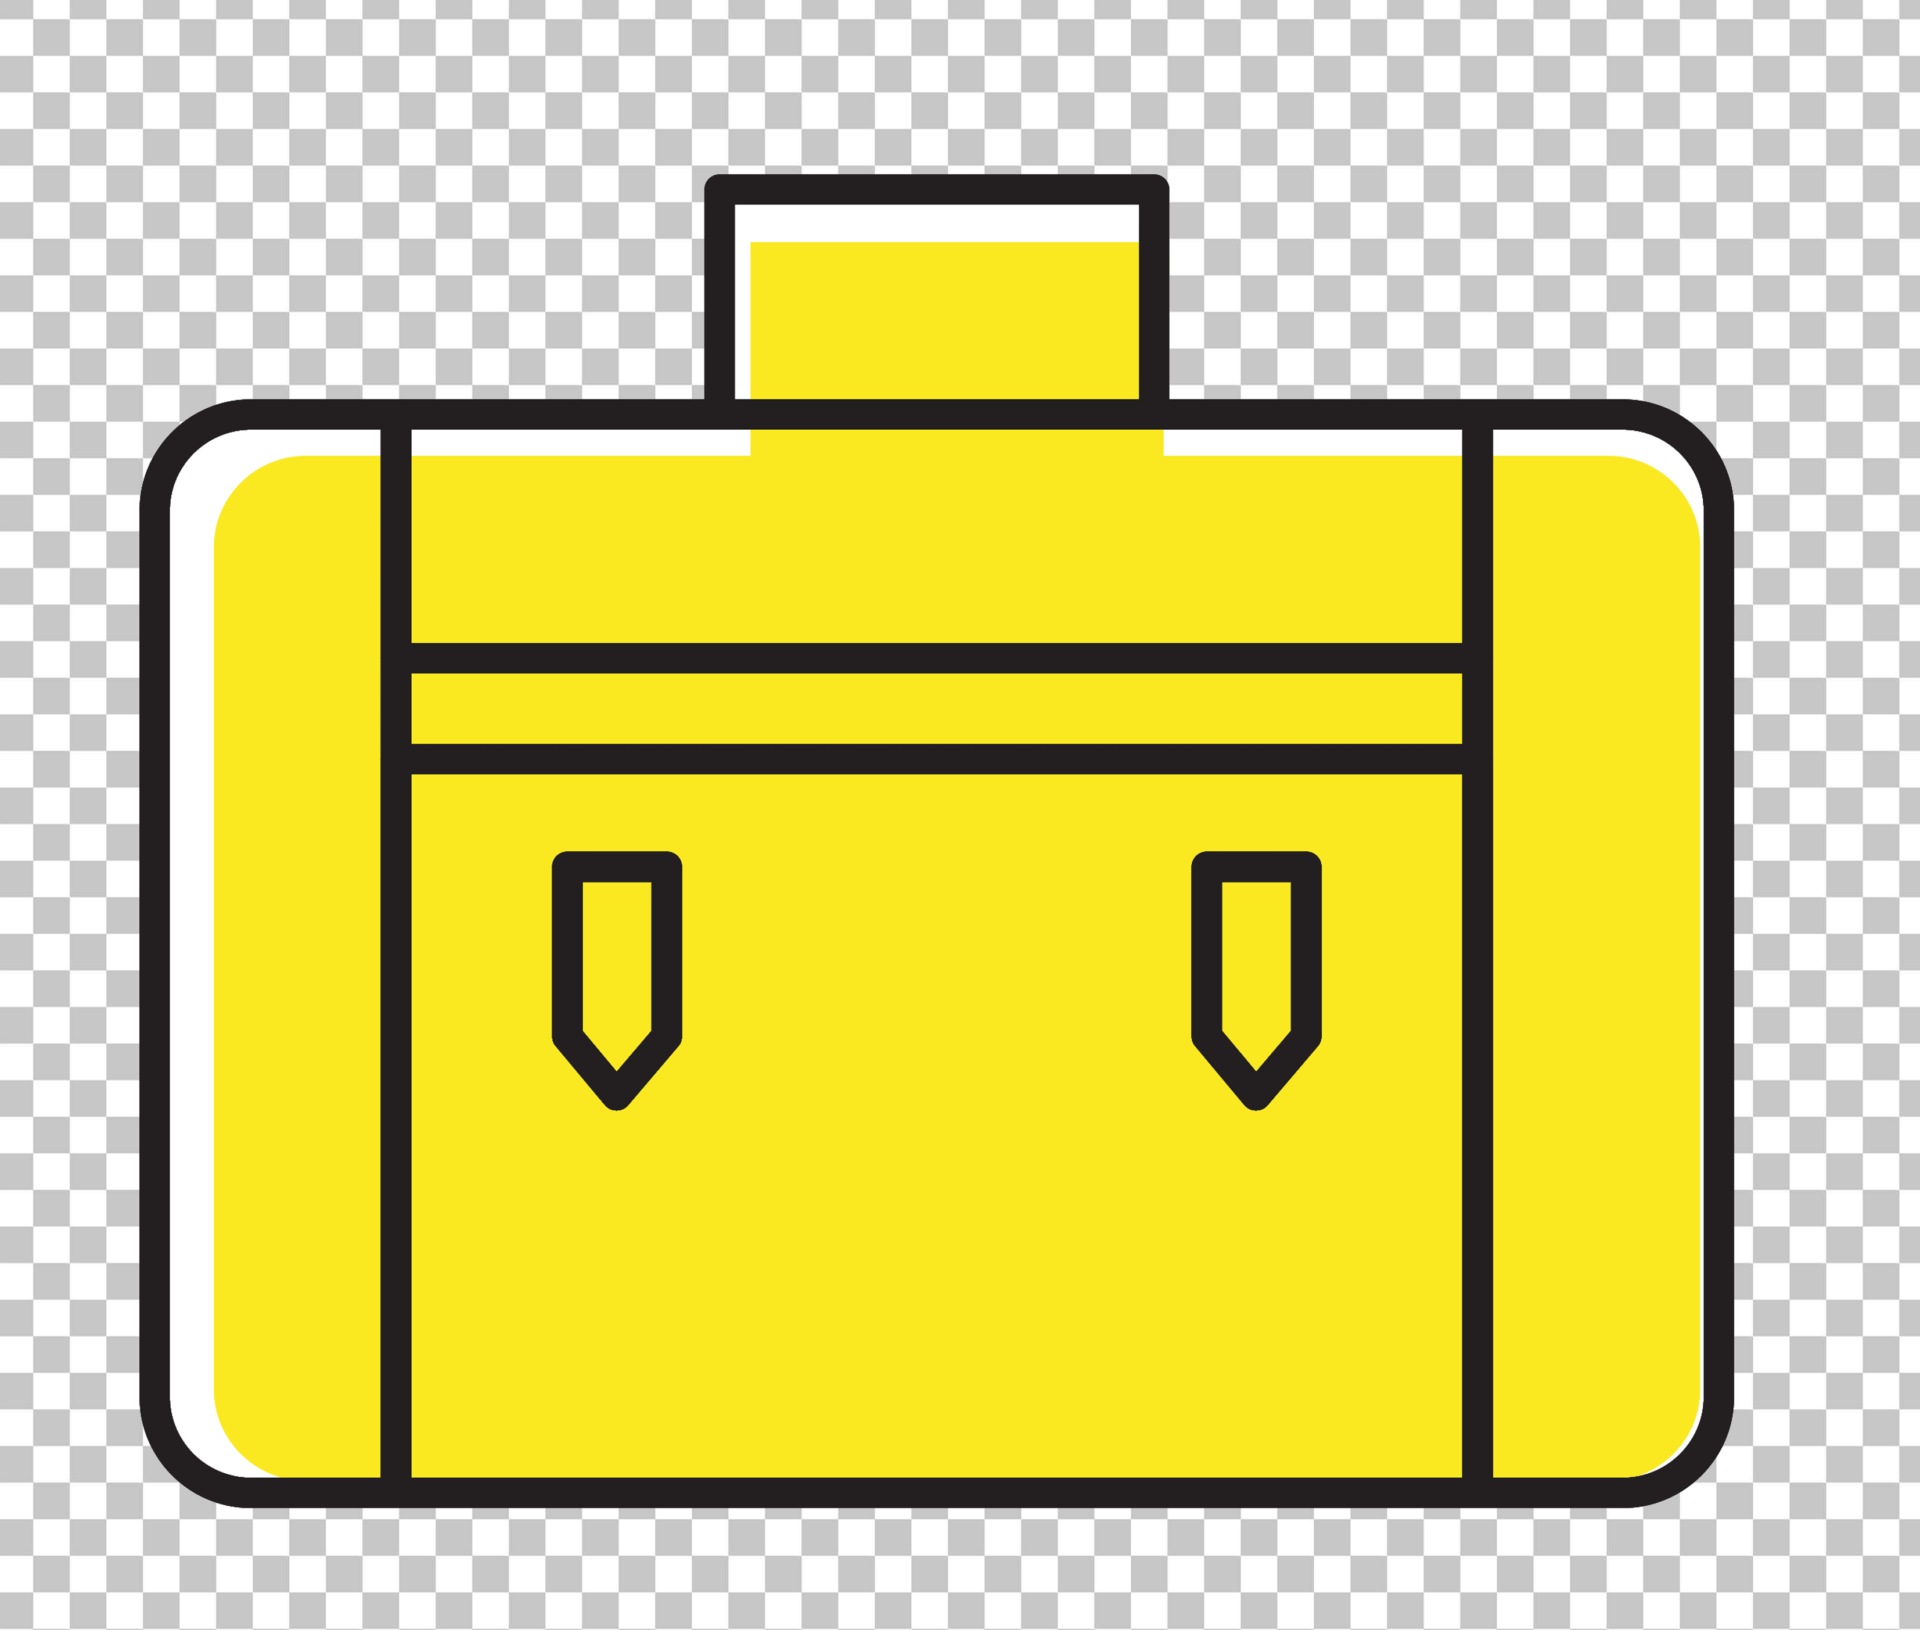 Yellow suitcase icon PNG Image